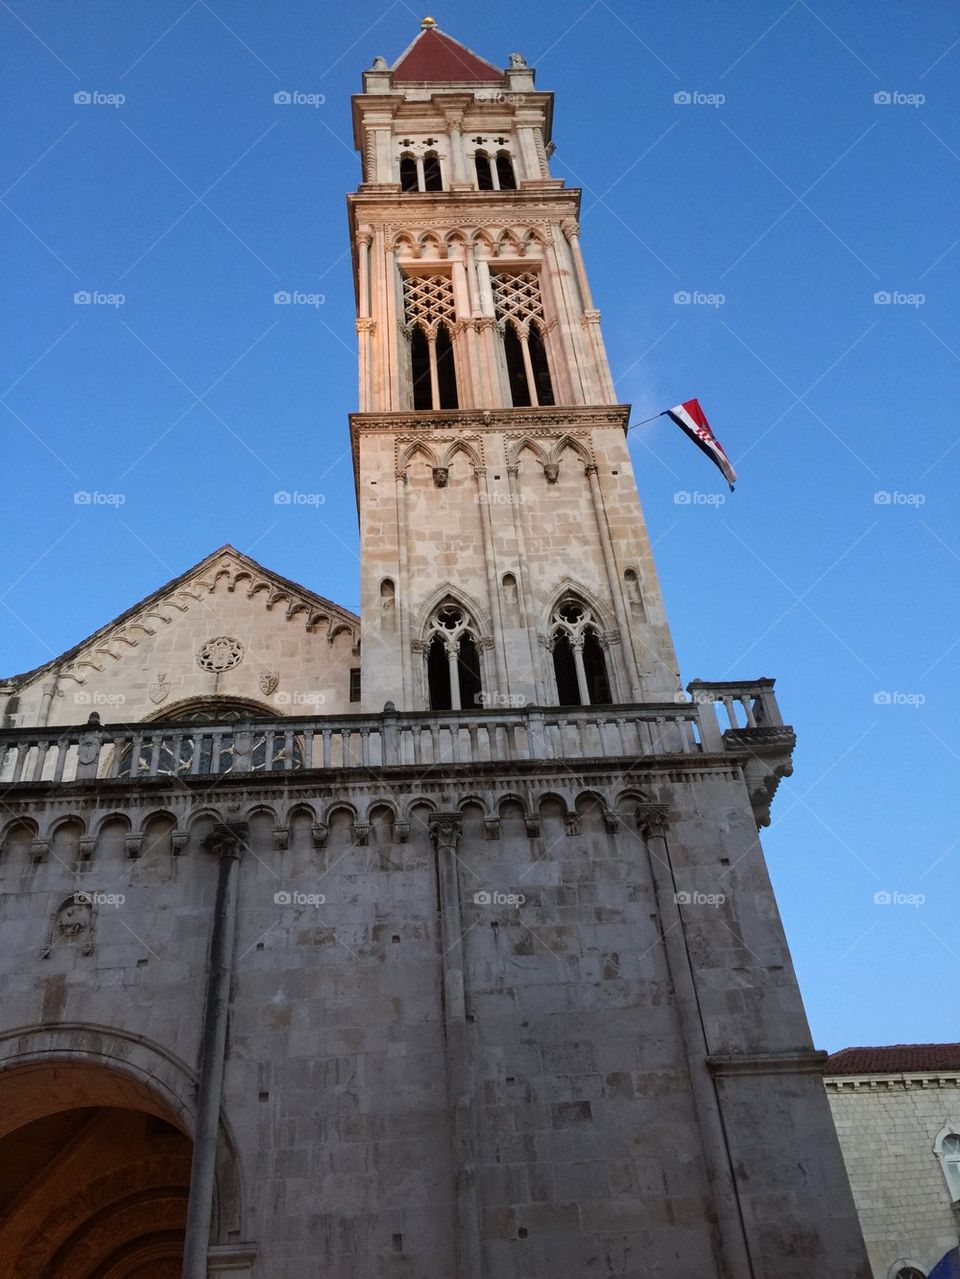 Trogir cathedral